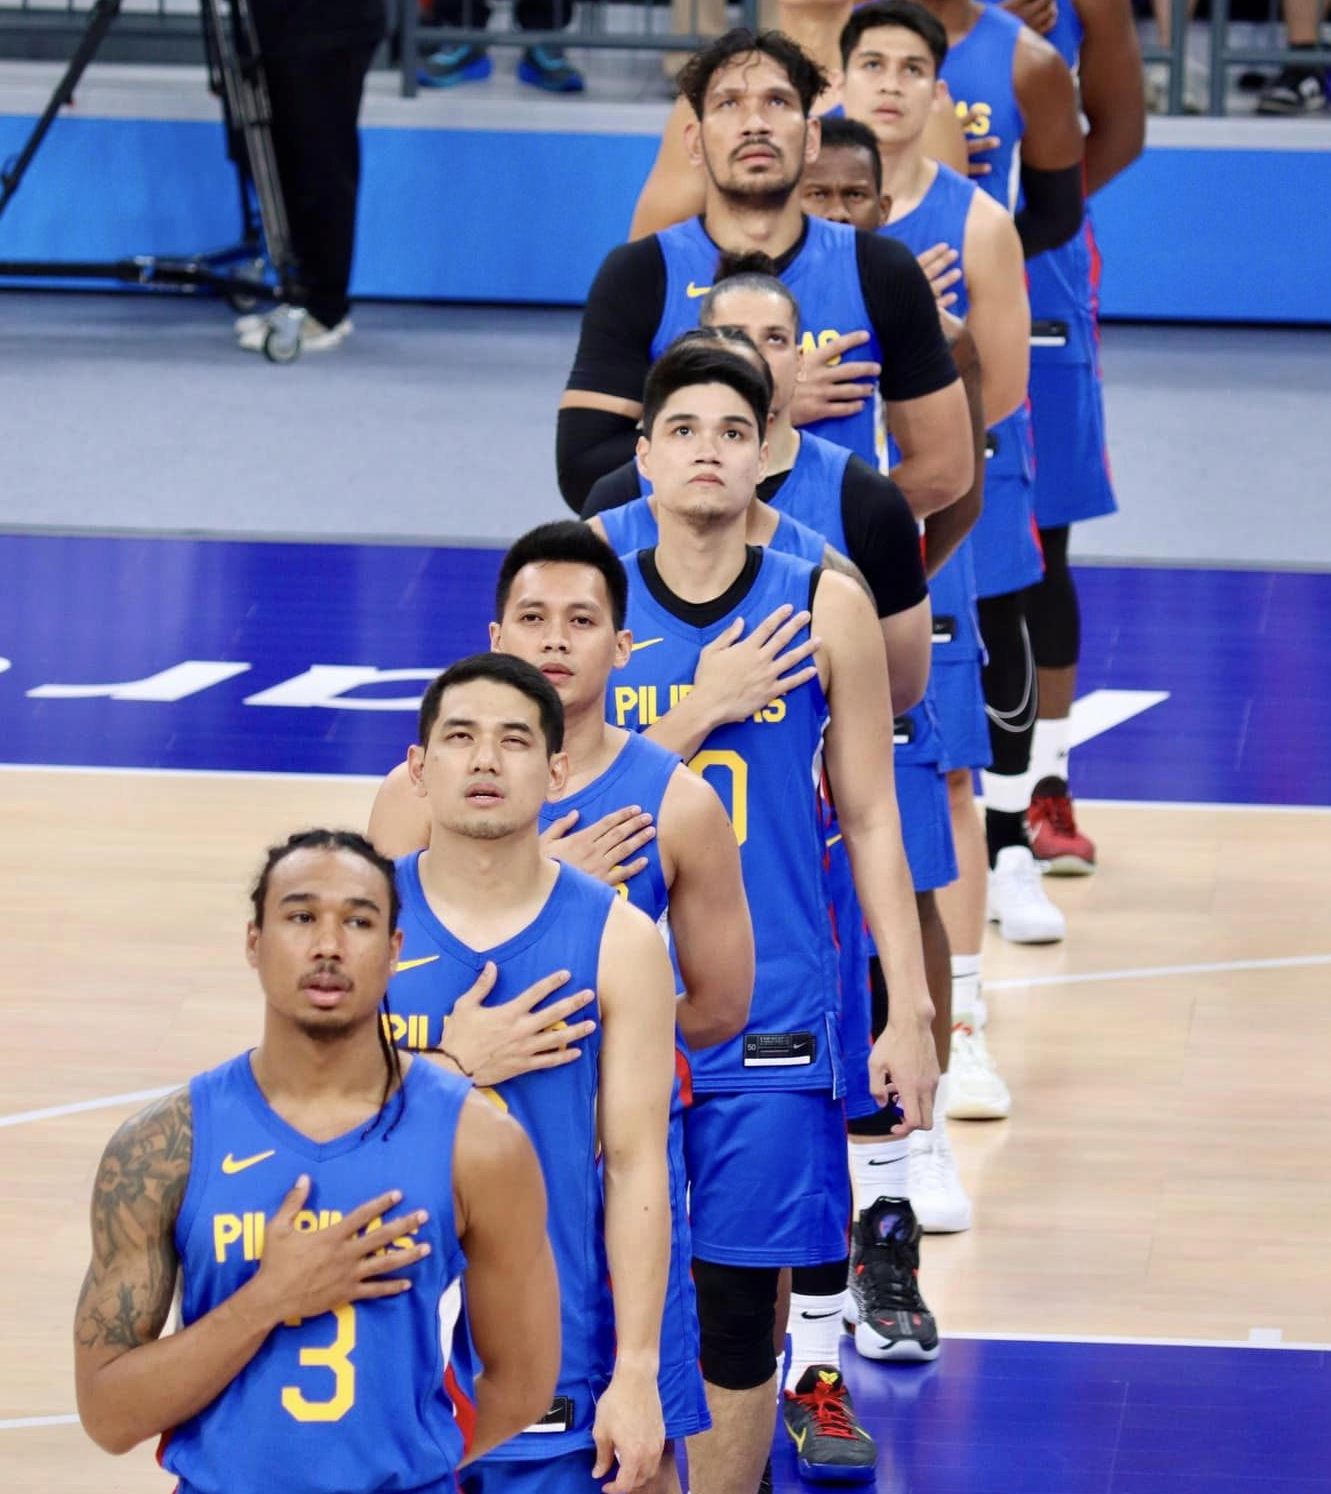 Gilas Pilipinas singing the national anthem before the gold medal match against Jordan in the 19th Asian Games men's basketball tournament.